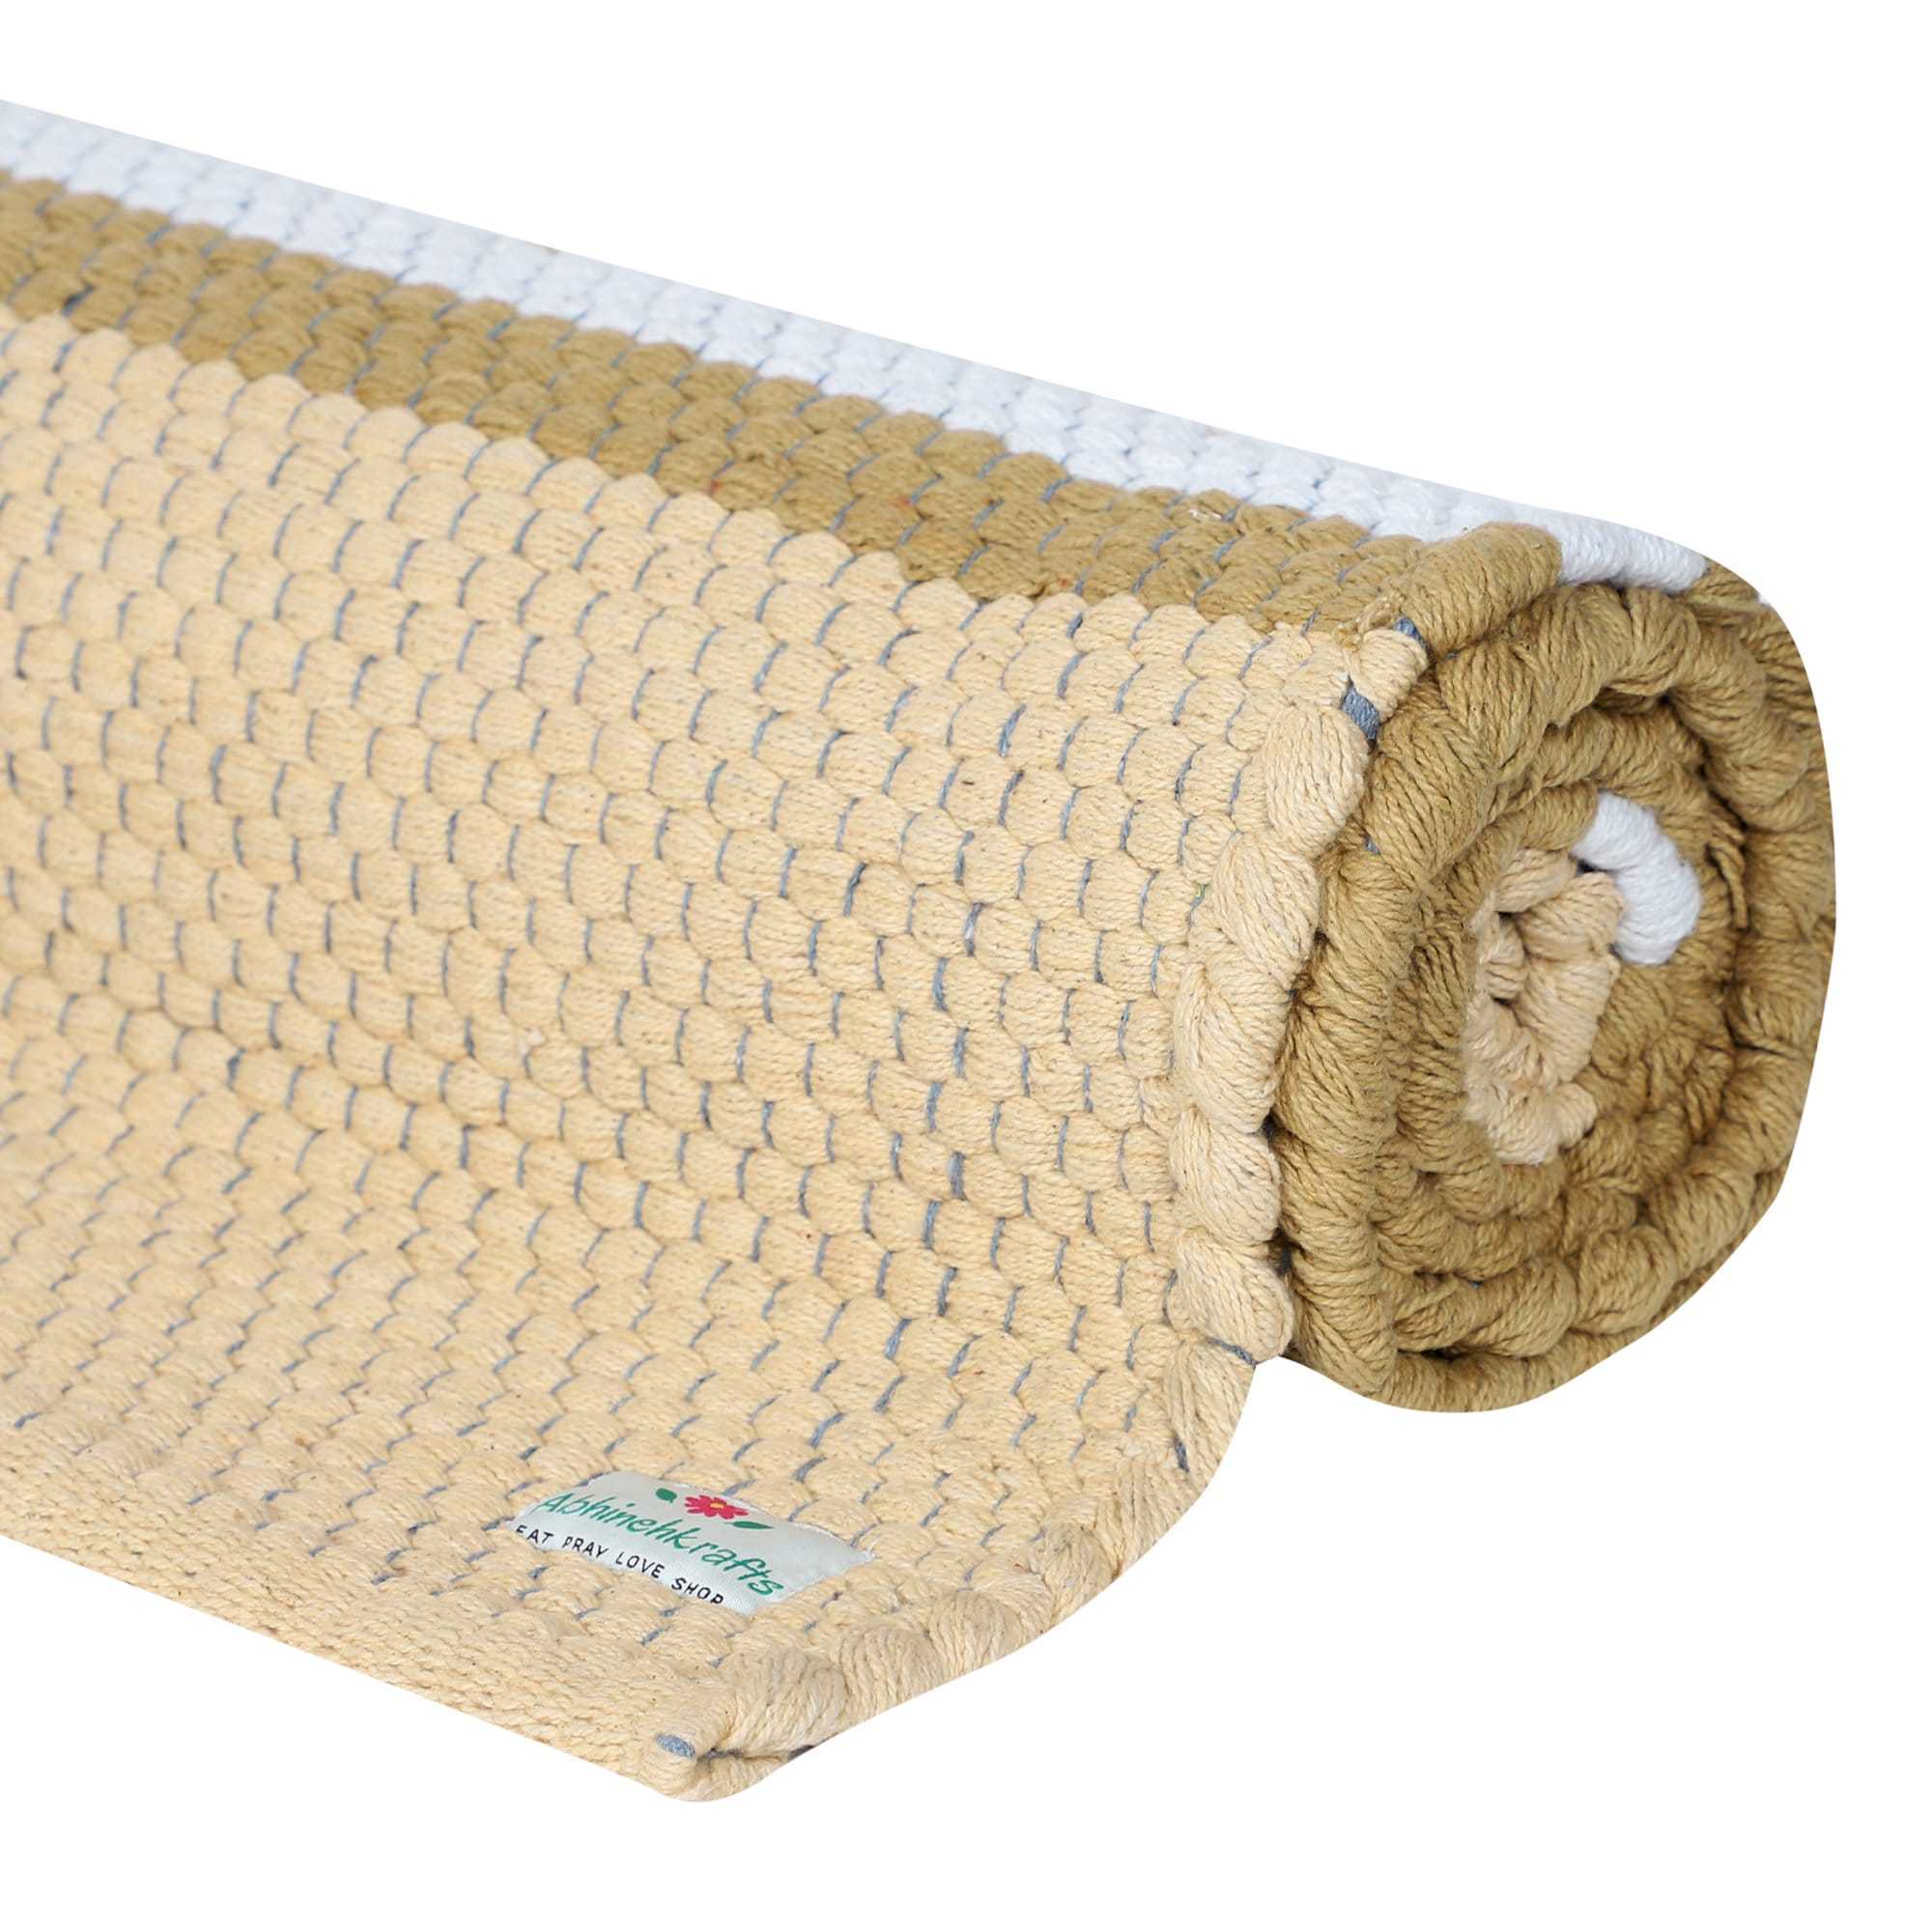 Super Thick Cotton Handwoven Anti Skid Mat for Hot Yoga and Fitness - Comfort for Knees